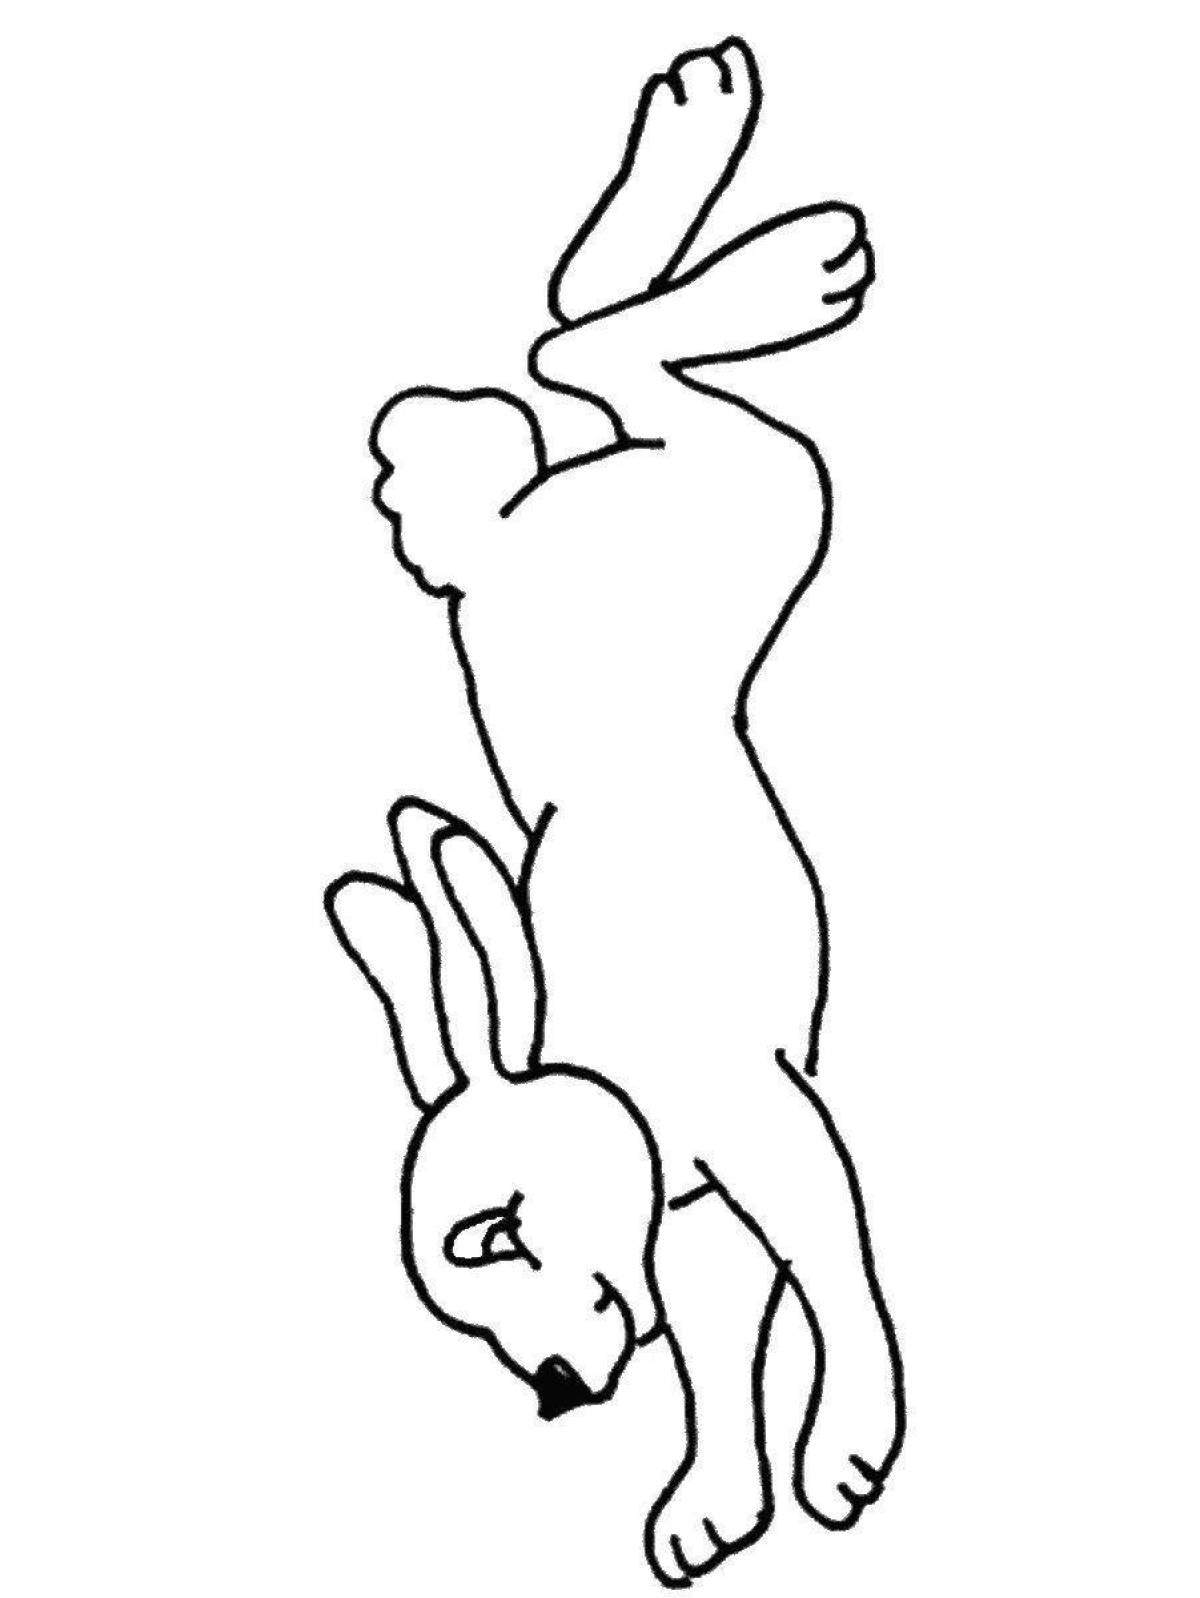 Coloring page graceful running hare